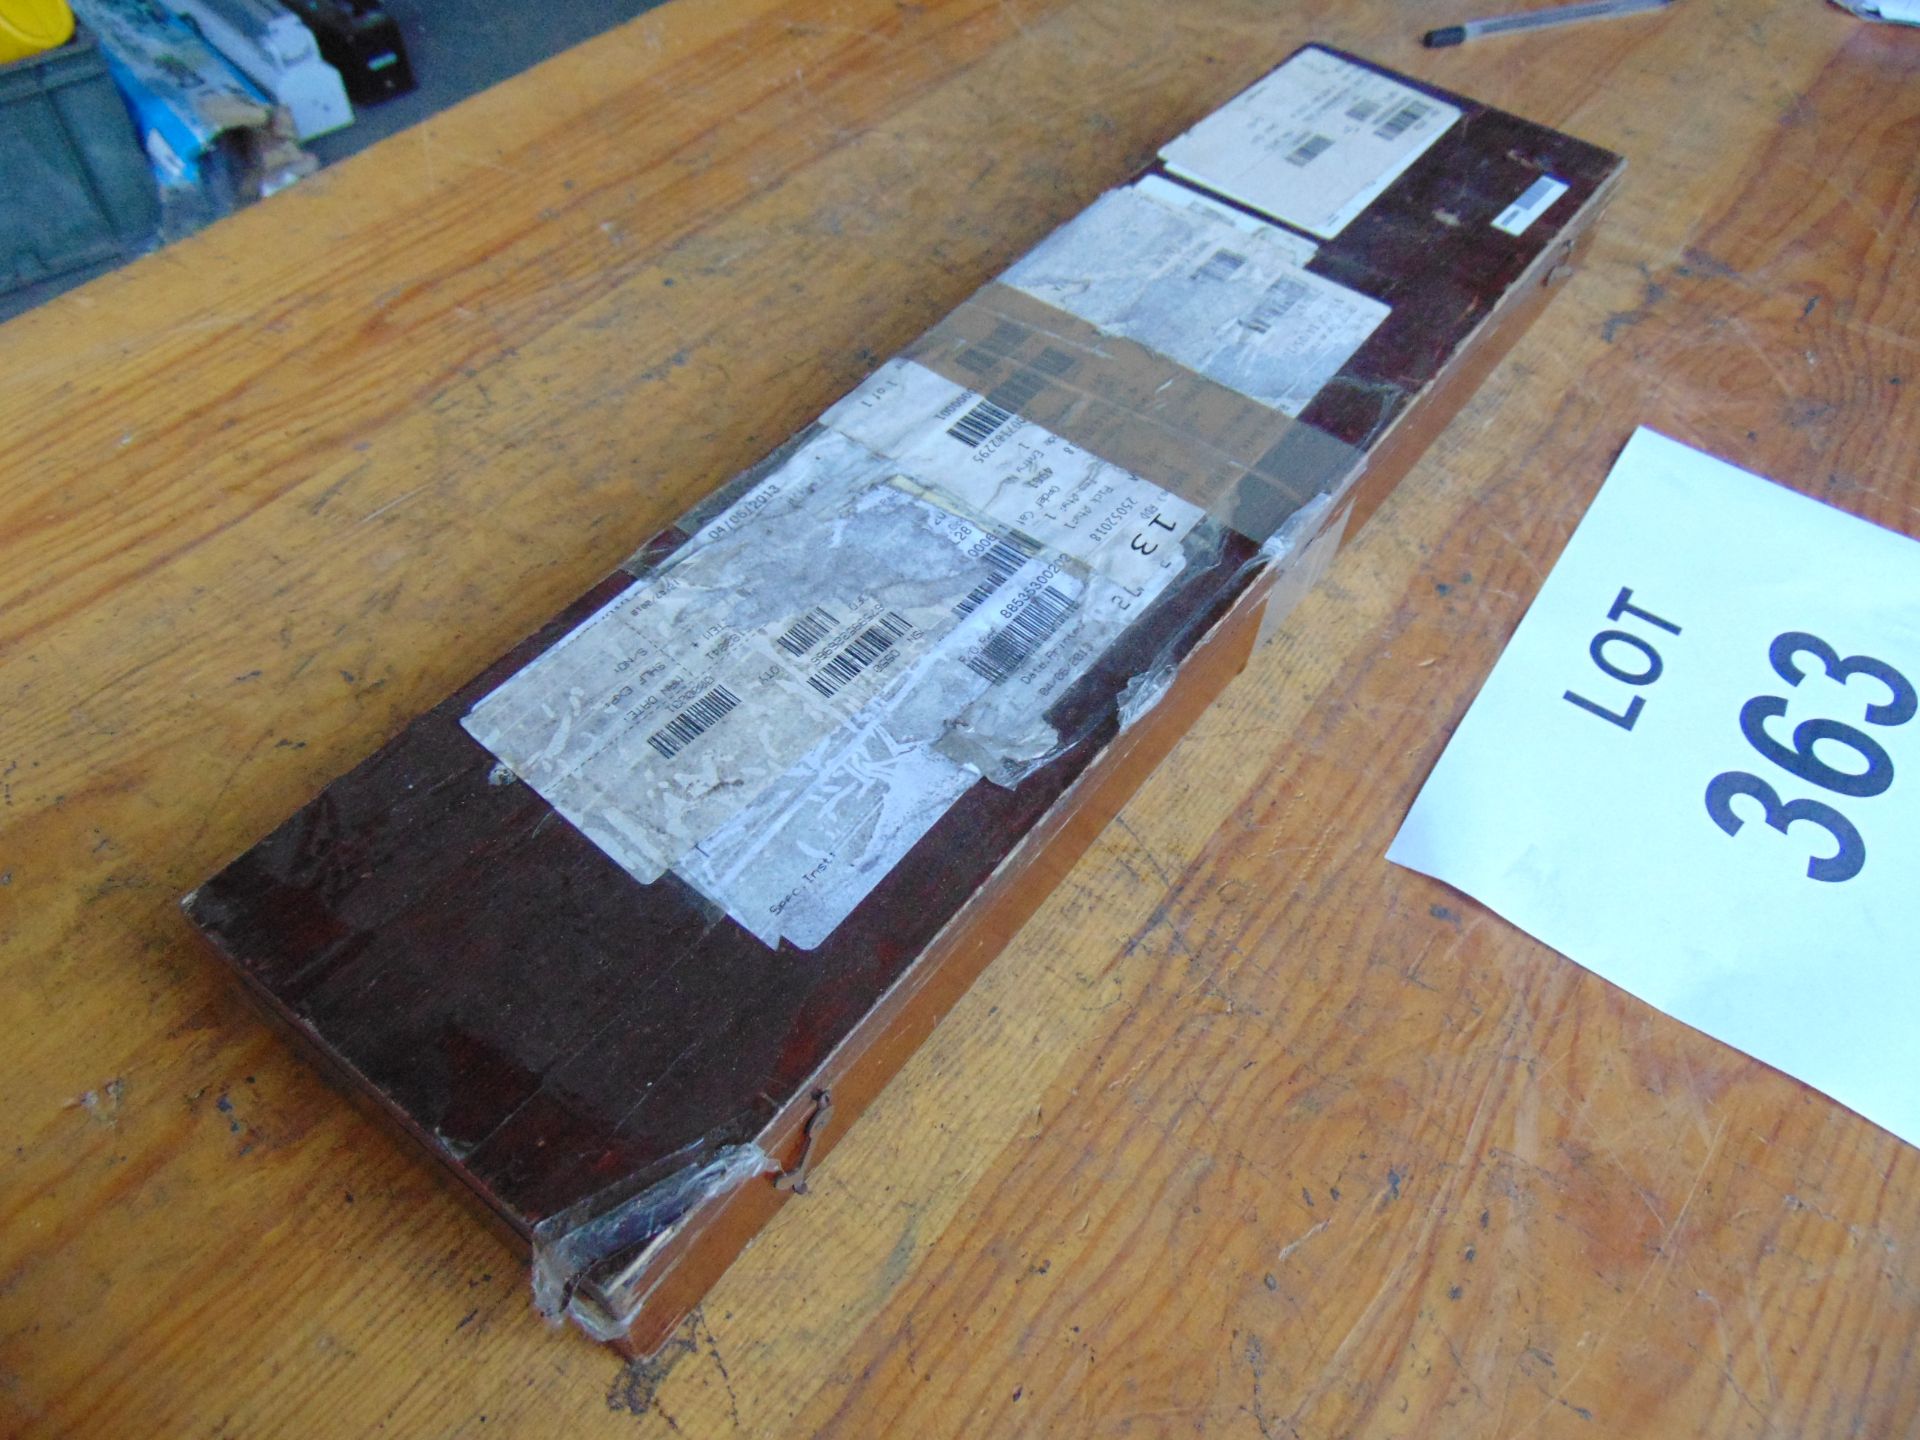 2 x Antique Parallel Navigation Rulers in Original Wooden Box - Image 6 of 6